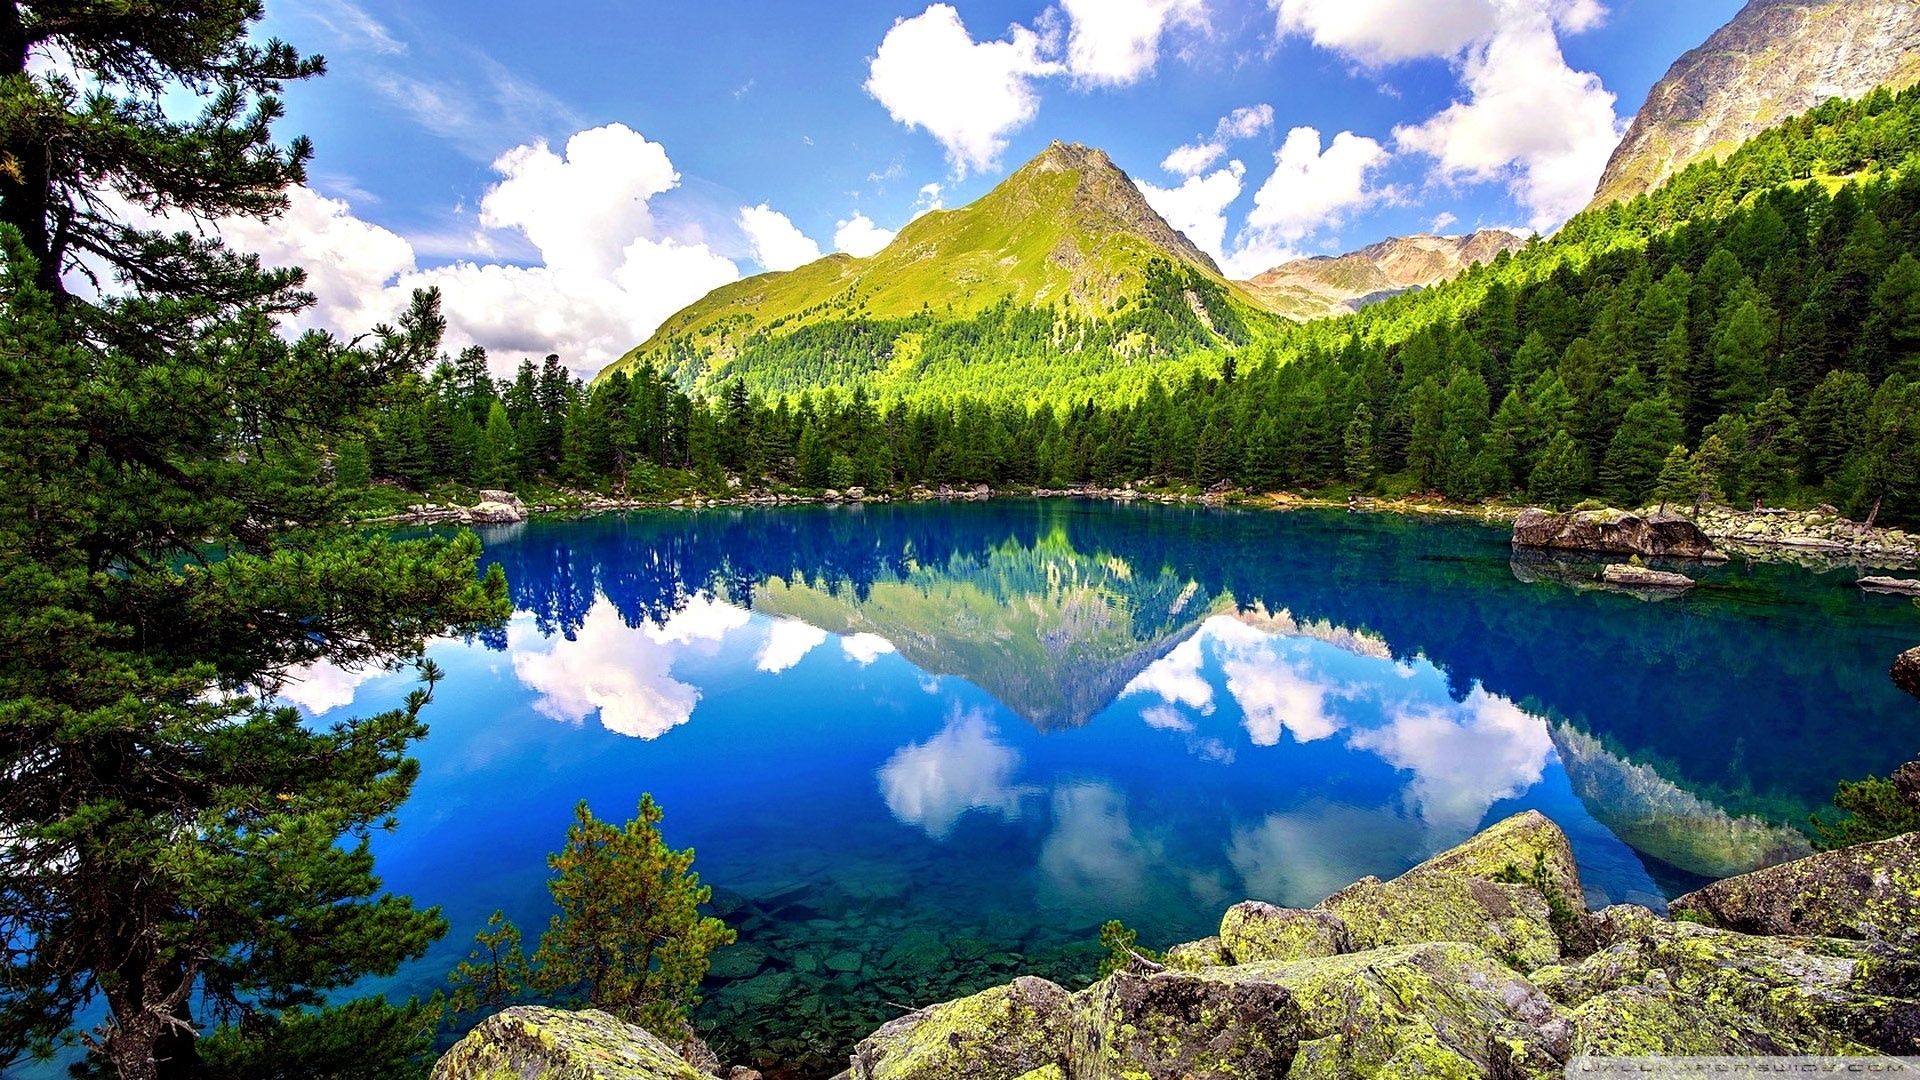  Springtime in the Mountains Wallpapers Download at WallpaperBro